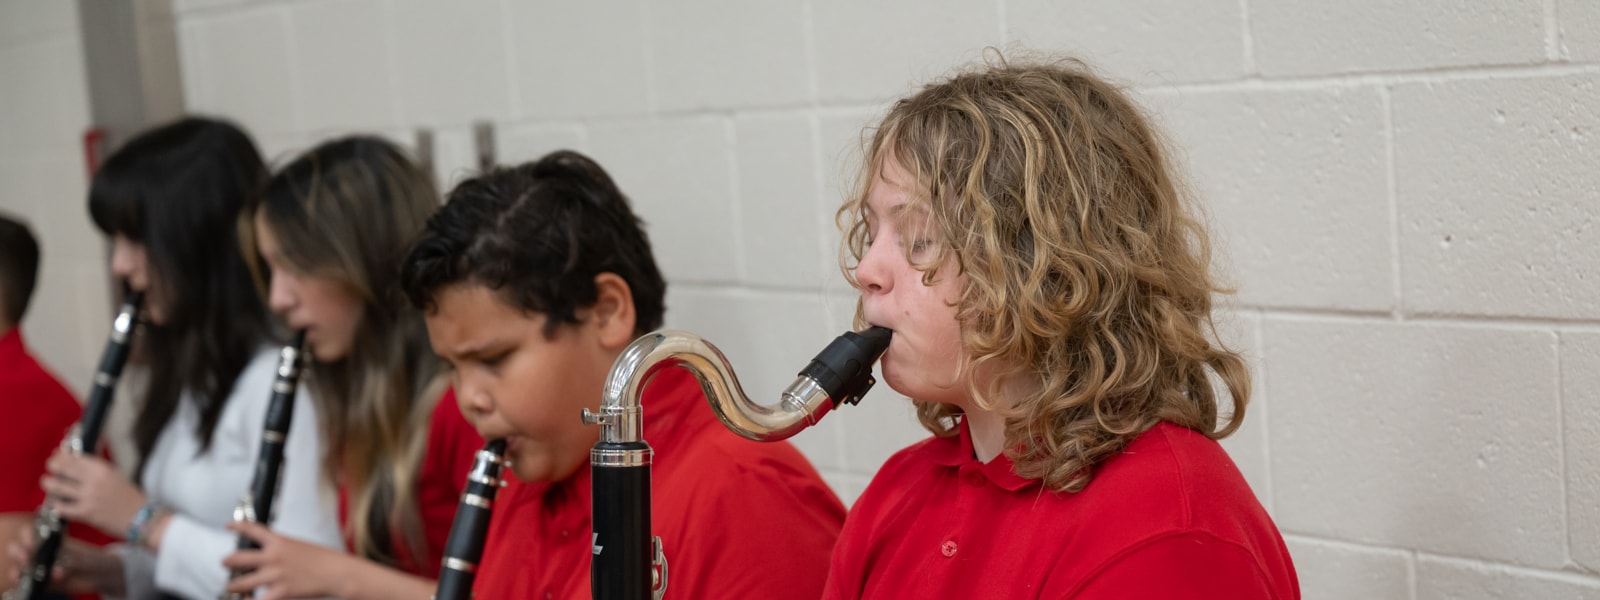 Students playing saxophone